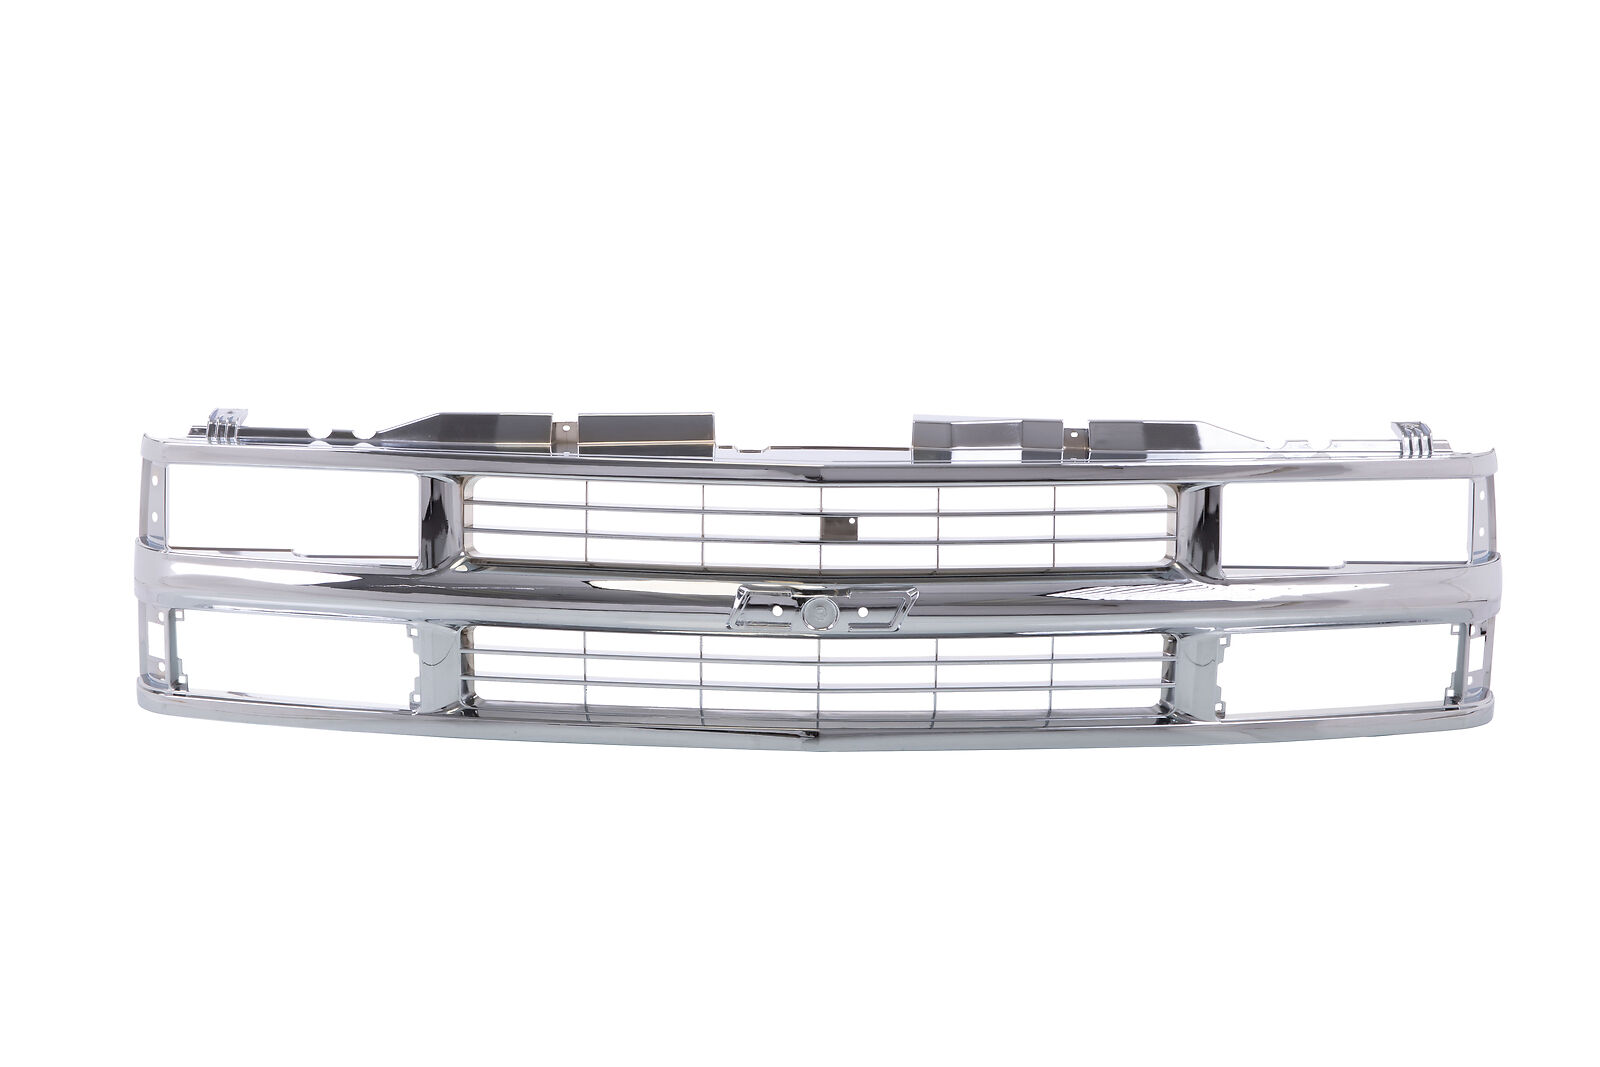 AM All Chrome Grille For 94-98 Chevy C/K 1500 2500 3500 Pickup Truck Composite